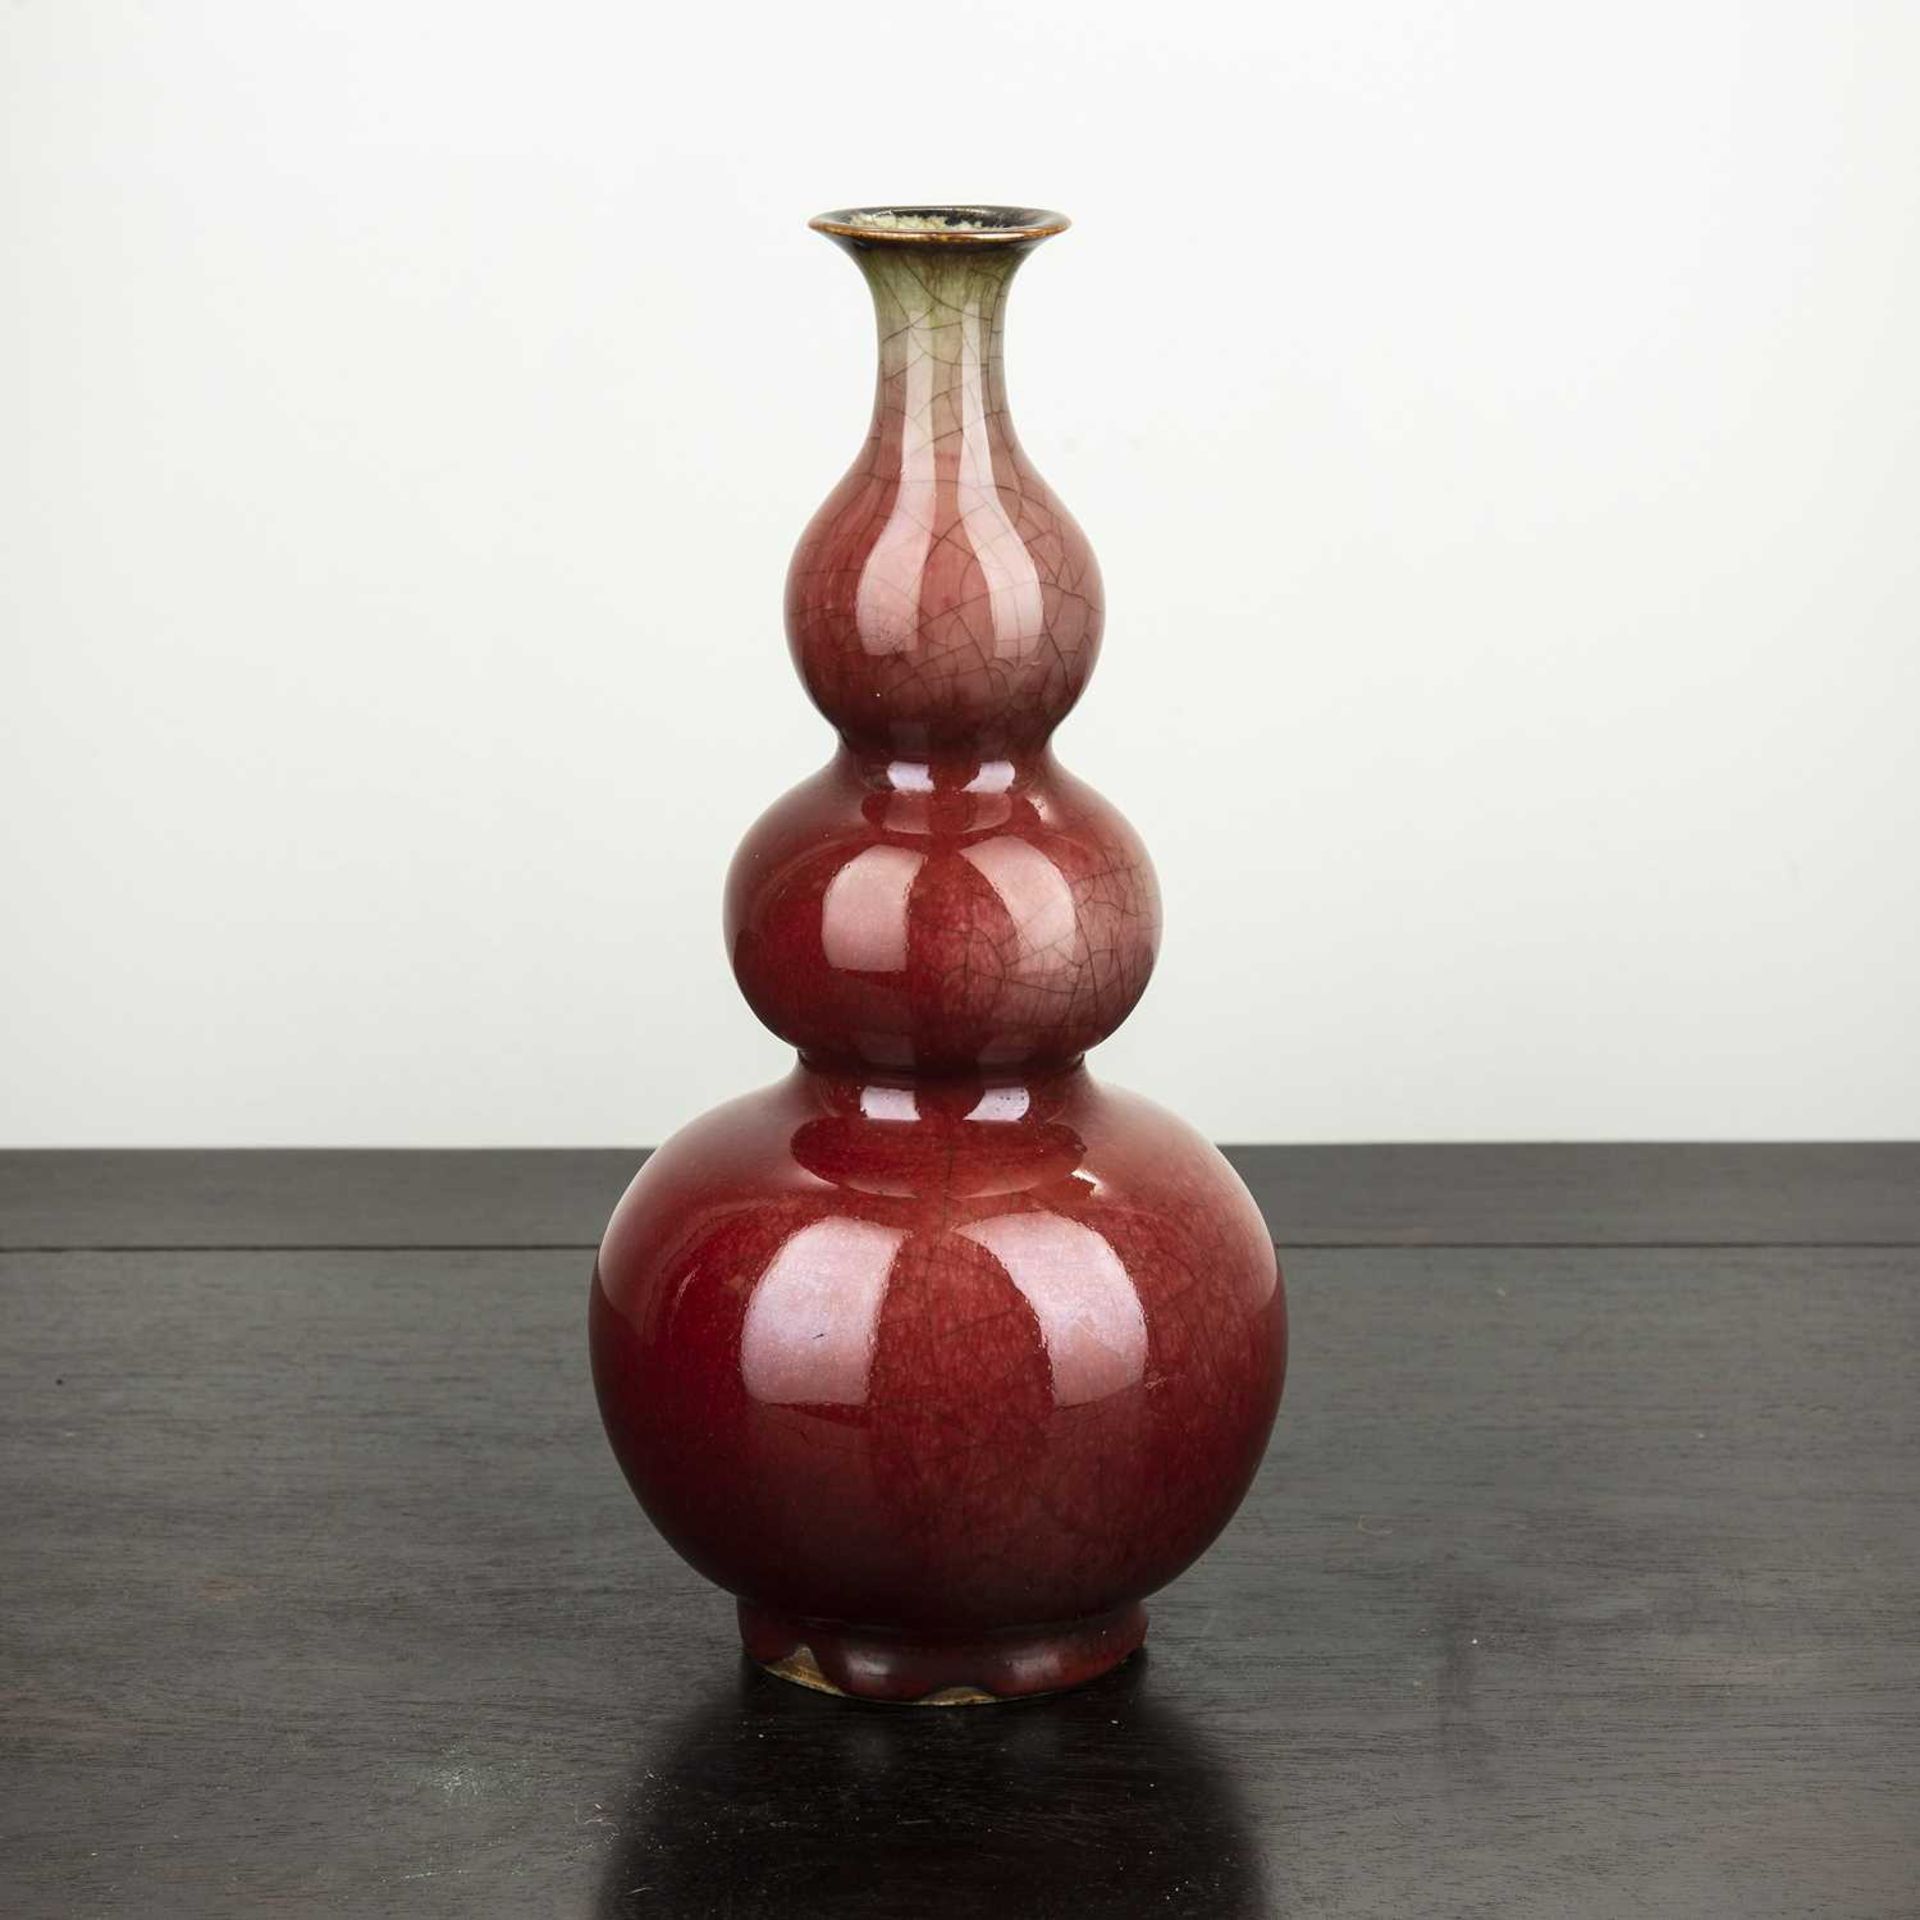 Triple gourd vase Chinese, late 19th Century covered all over with a deep red glaze, 24cm high